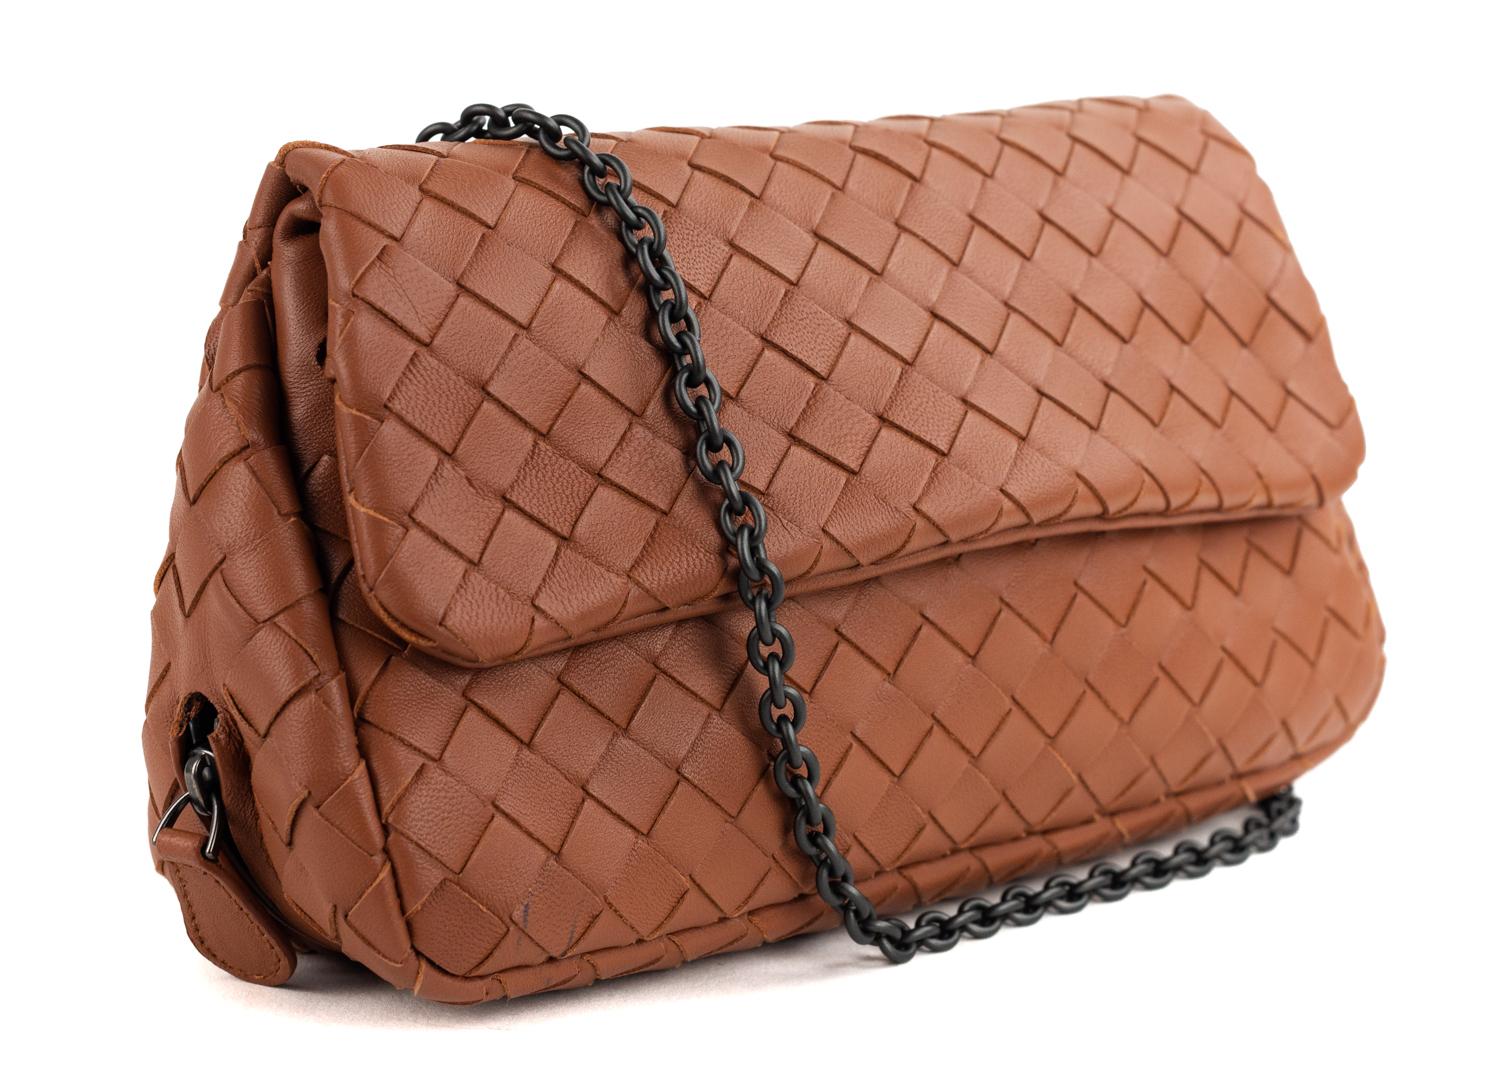 Bottega Venetas intrecciato crossbody bag in a natural brown color. This bag features their woven signature detailing with a matching gunmetal chain shoulder strap. Perfect everyday bag to store all your daily essentials in.



Bottega Veneta